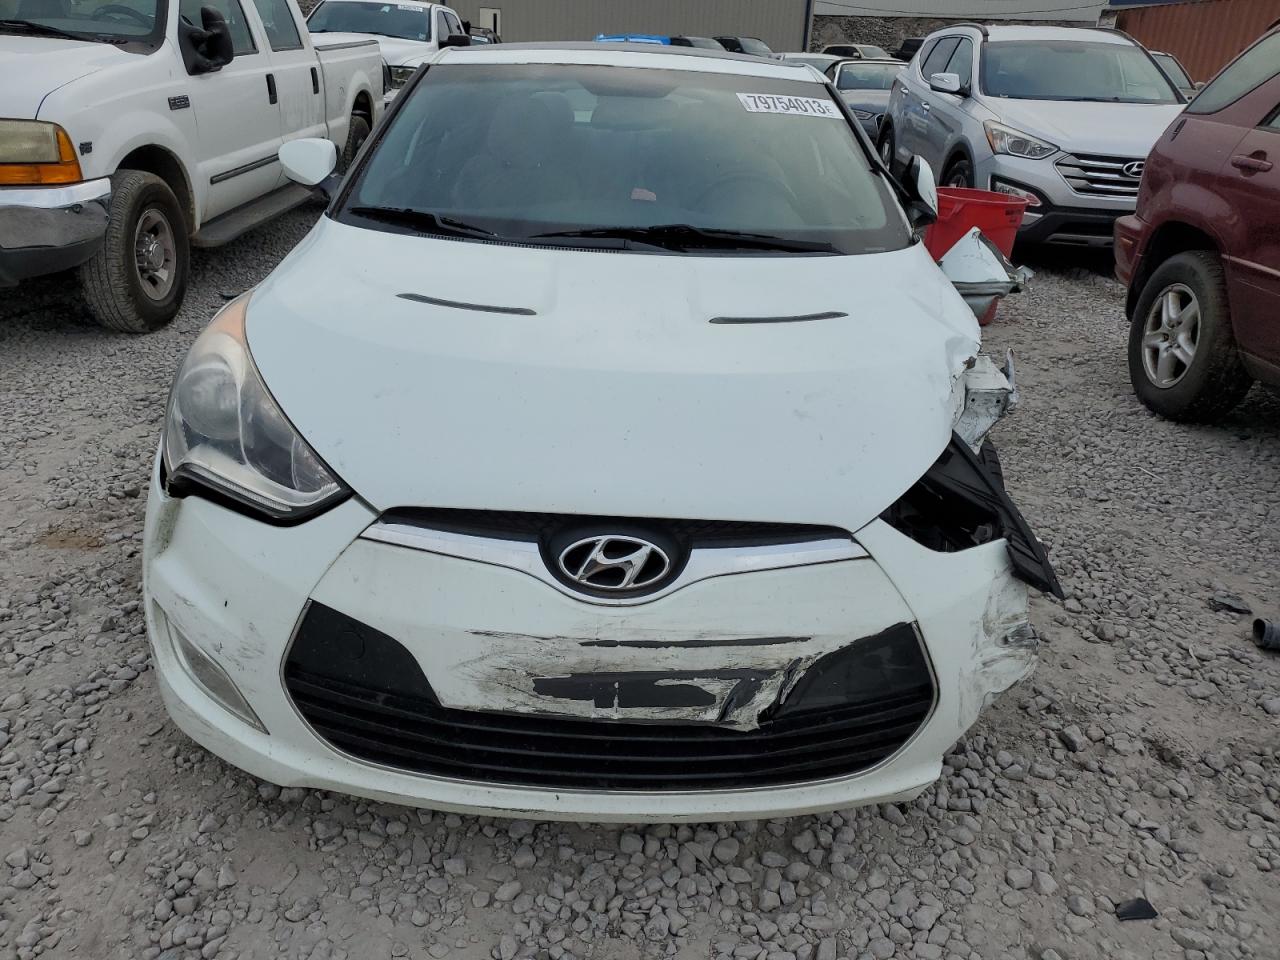 KMHTC6AD4CU****** Used and Repairable 2012 Hyundai Veloster in Alabama State